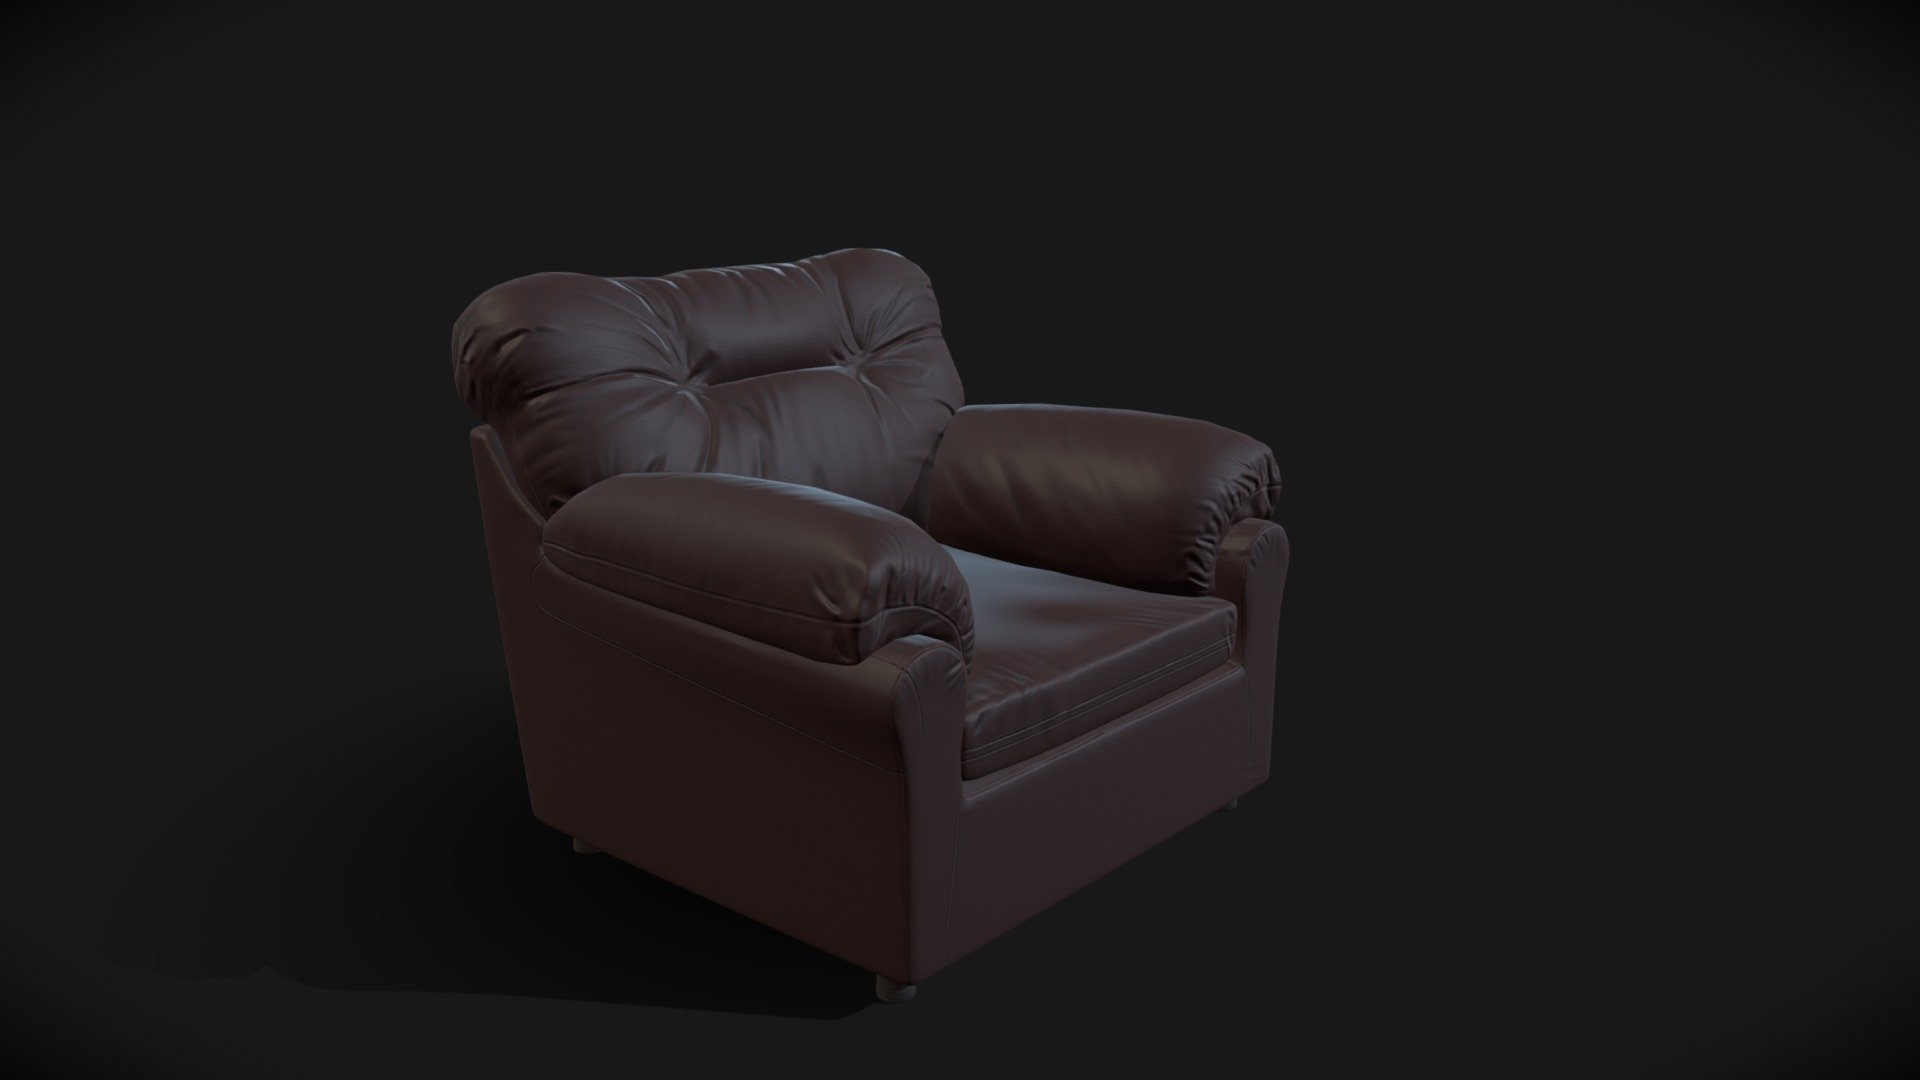 Low-poly, game-ready model of a CasaStyle Deep Seating and Spacious Design Emrado Leatherette Brown .

1) Tan leather

TEXTURES

High resolution PBR Metal/Roughness textures are provided in the additional files.

Texture size: 2048 x 2048 Texture format: PNG 8 bit (uncompressed)


Base Color (Diffuse)
Metallic
Roughness
Normal
 - Sofa(PBR)(AR/VR) - Buy Royalty Free 3D model by nirmitgarg 3d model